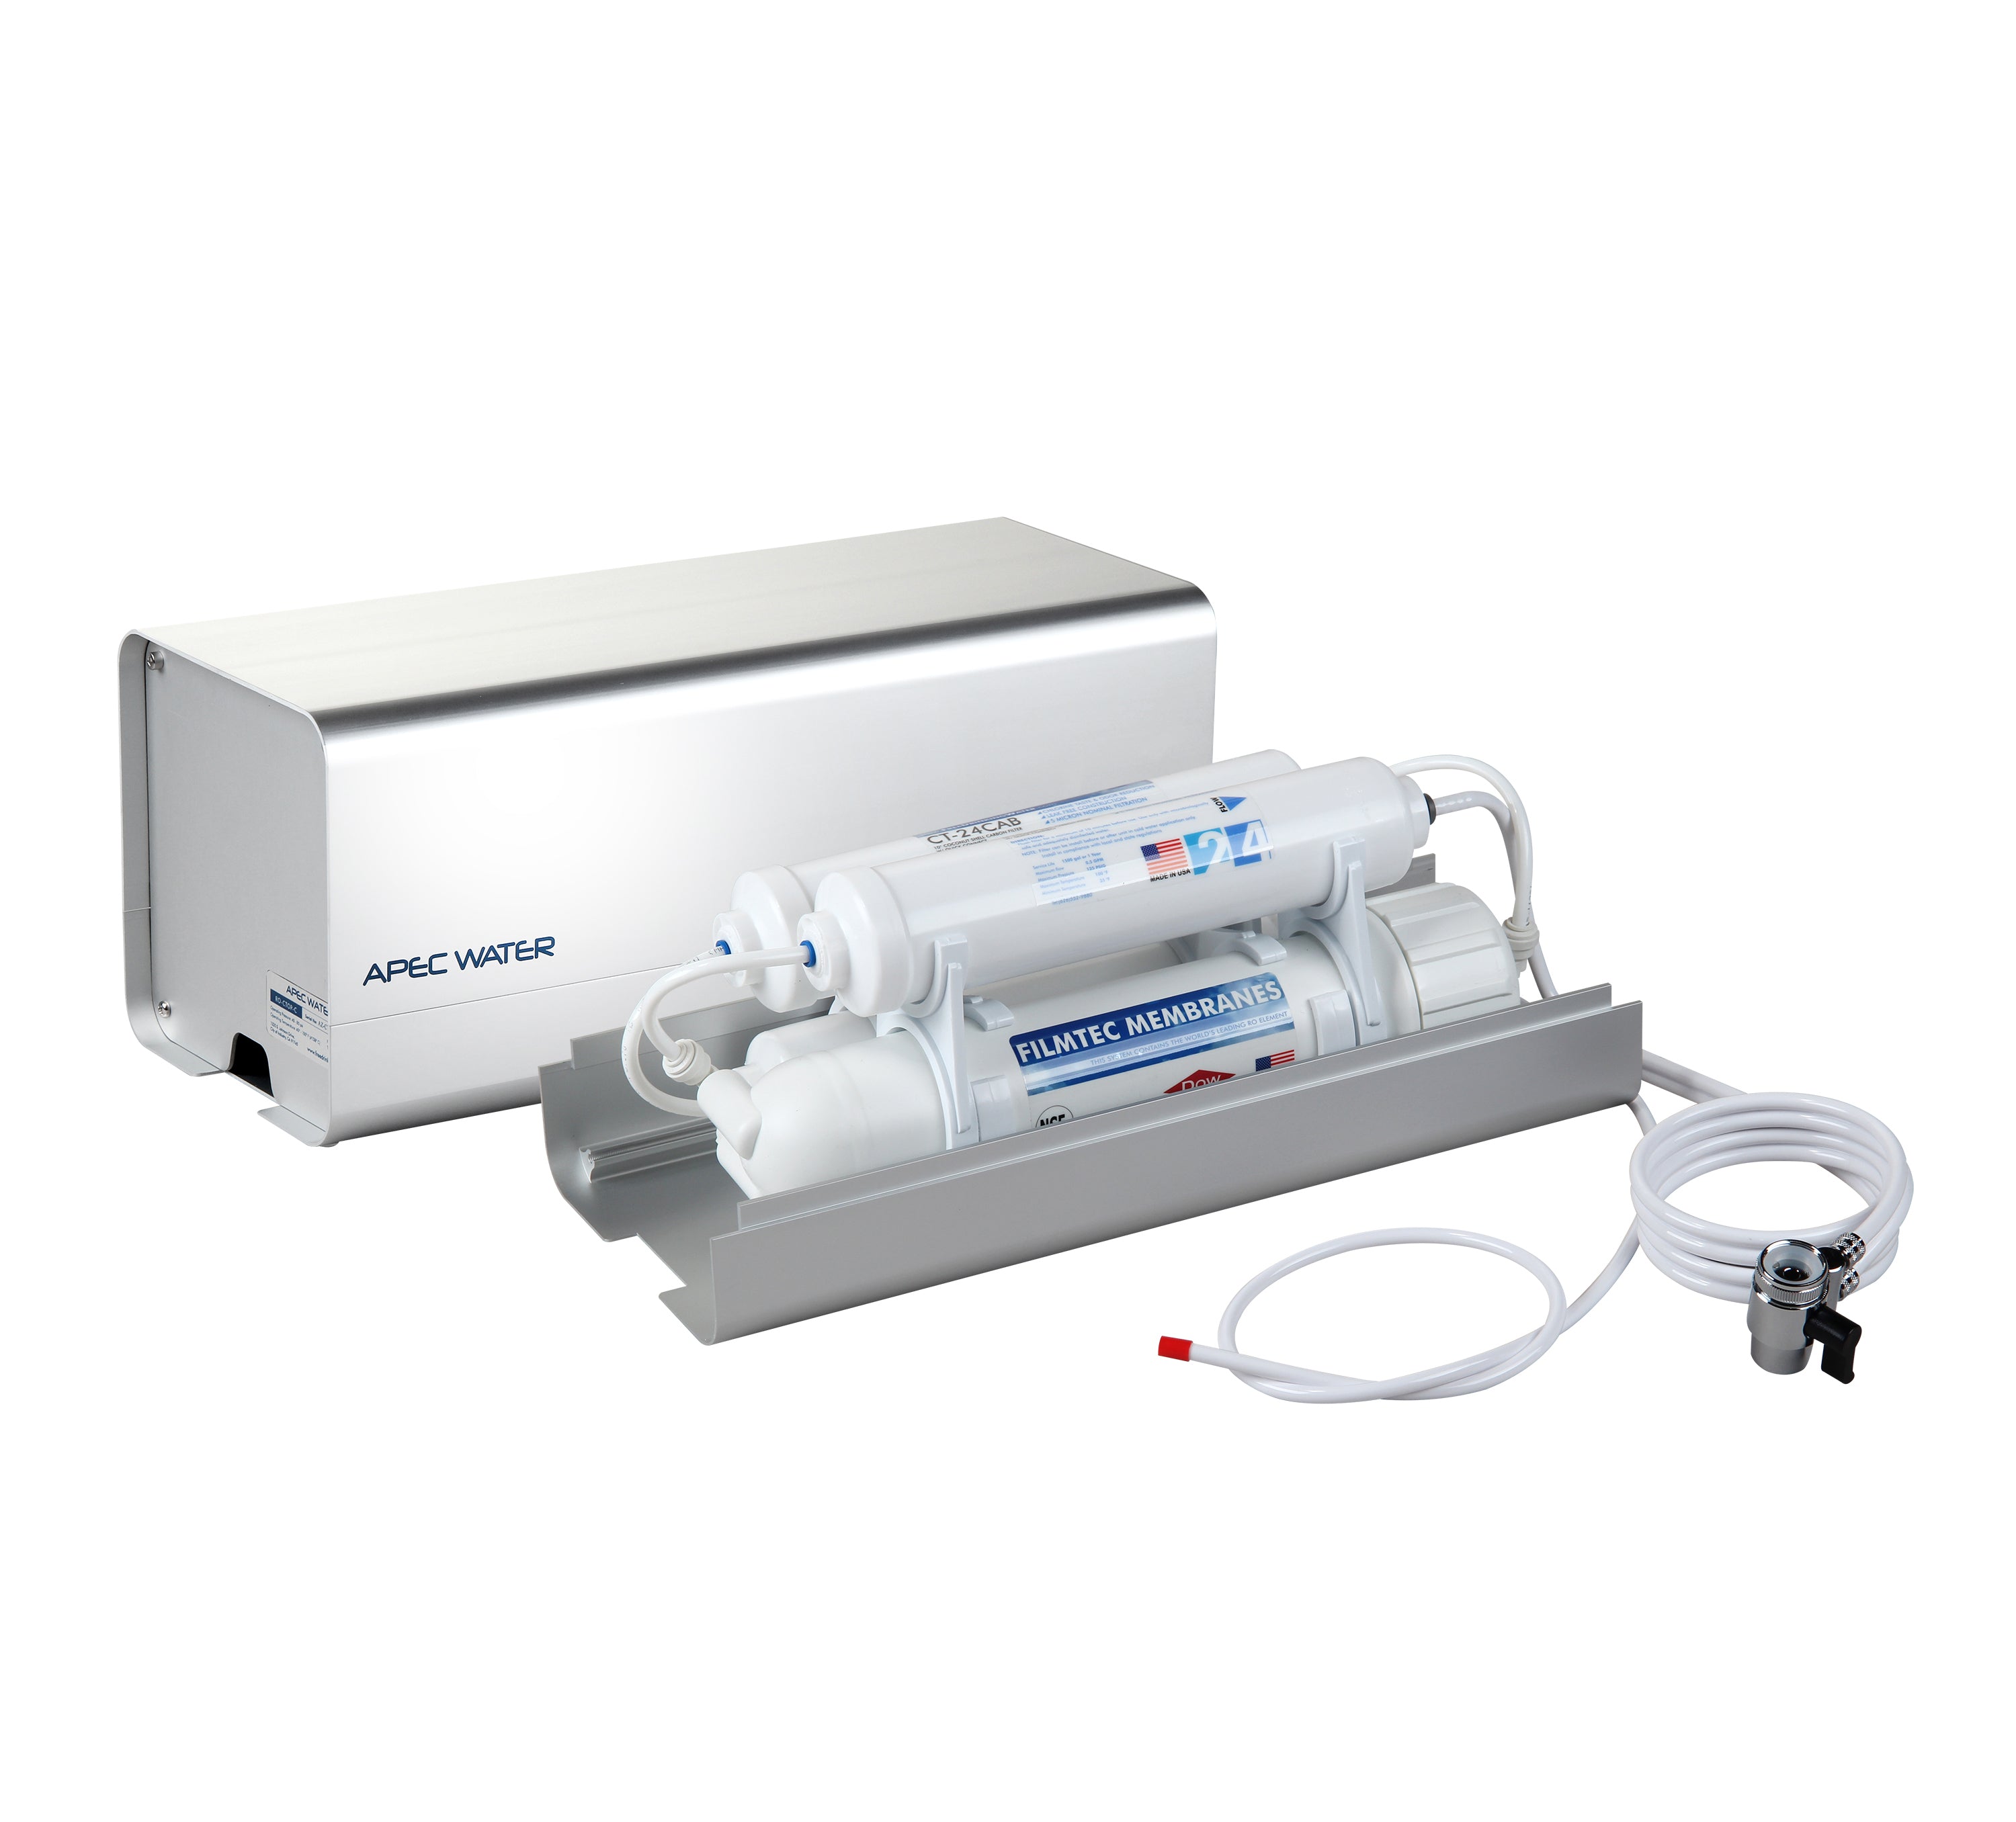 RO-CTOP-C – Portable 90 GPD Countertop Reverse Osmosis Water Systems for Drinking Water, With Case